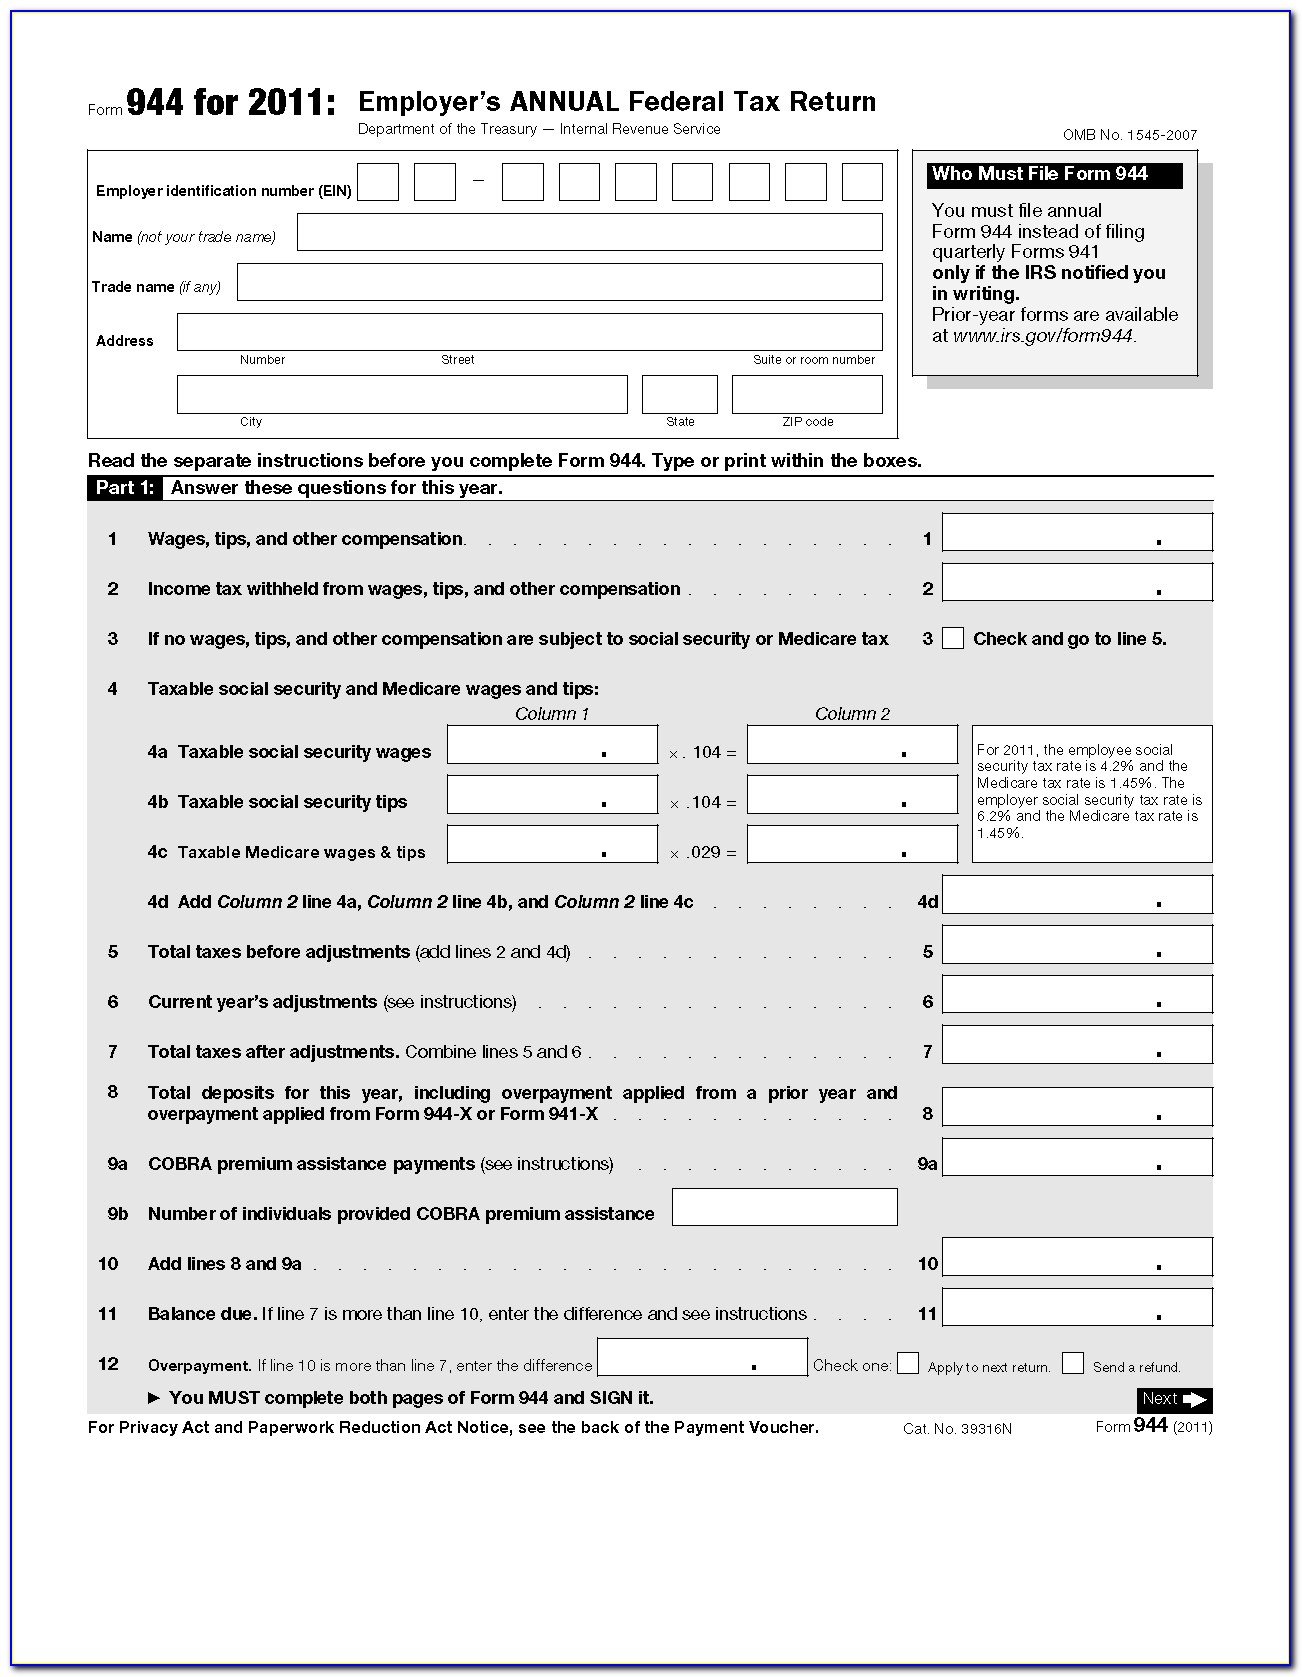 Irs.gov 2016 Income Tax Forms